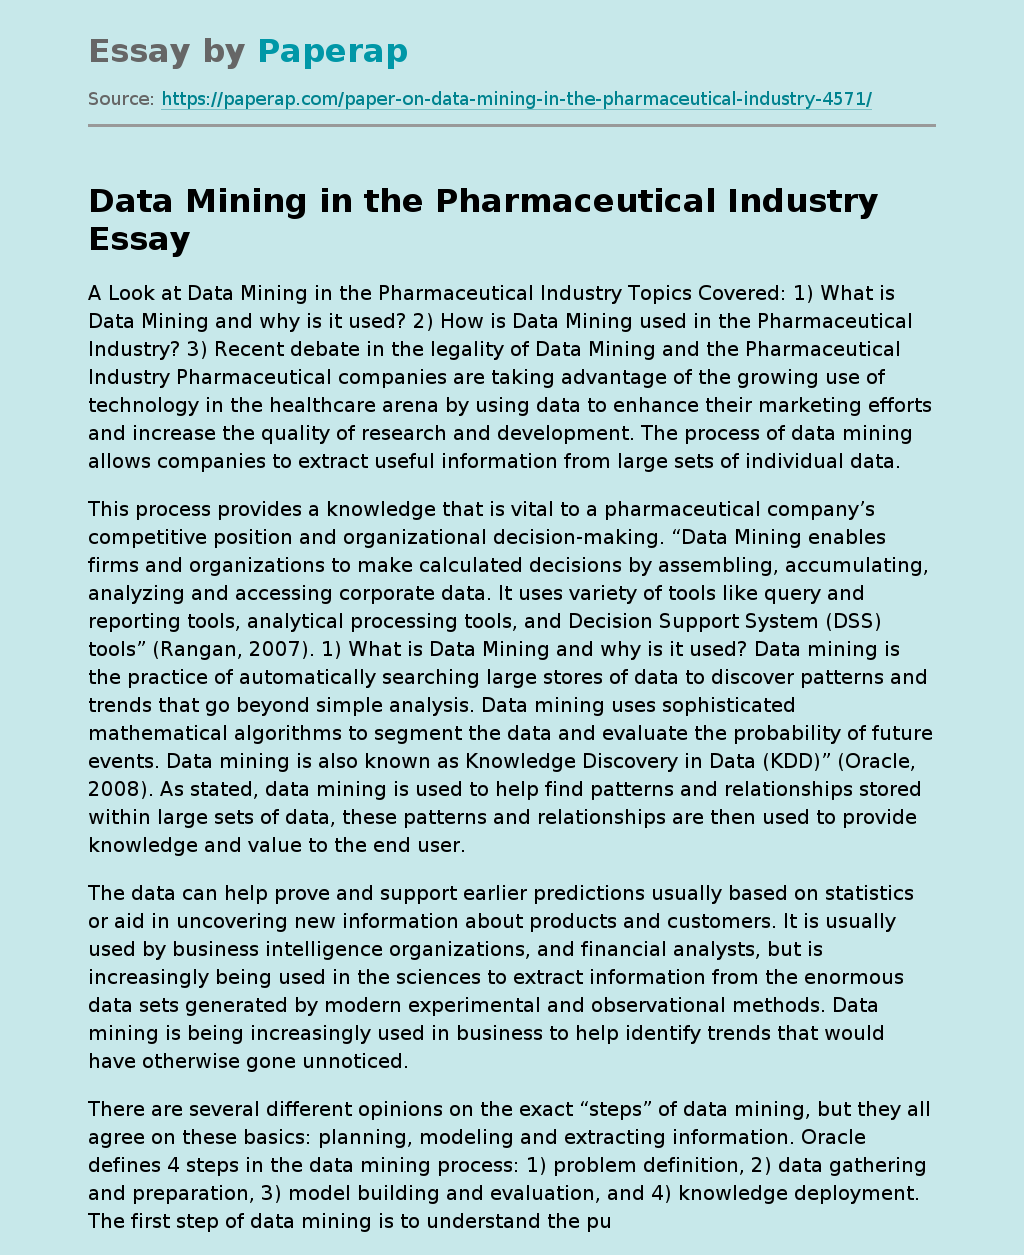 Data Mining in the Pharmaceutical Industry